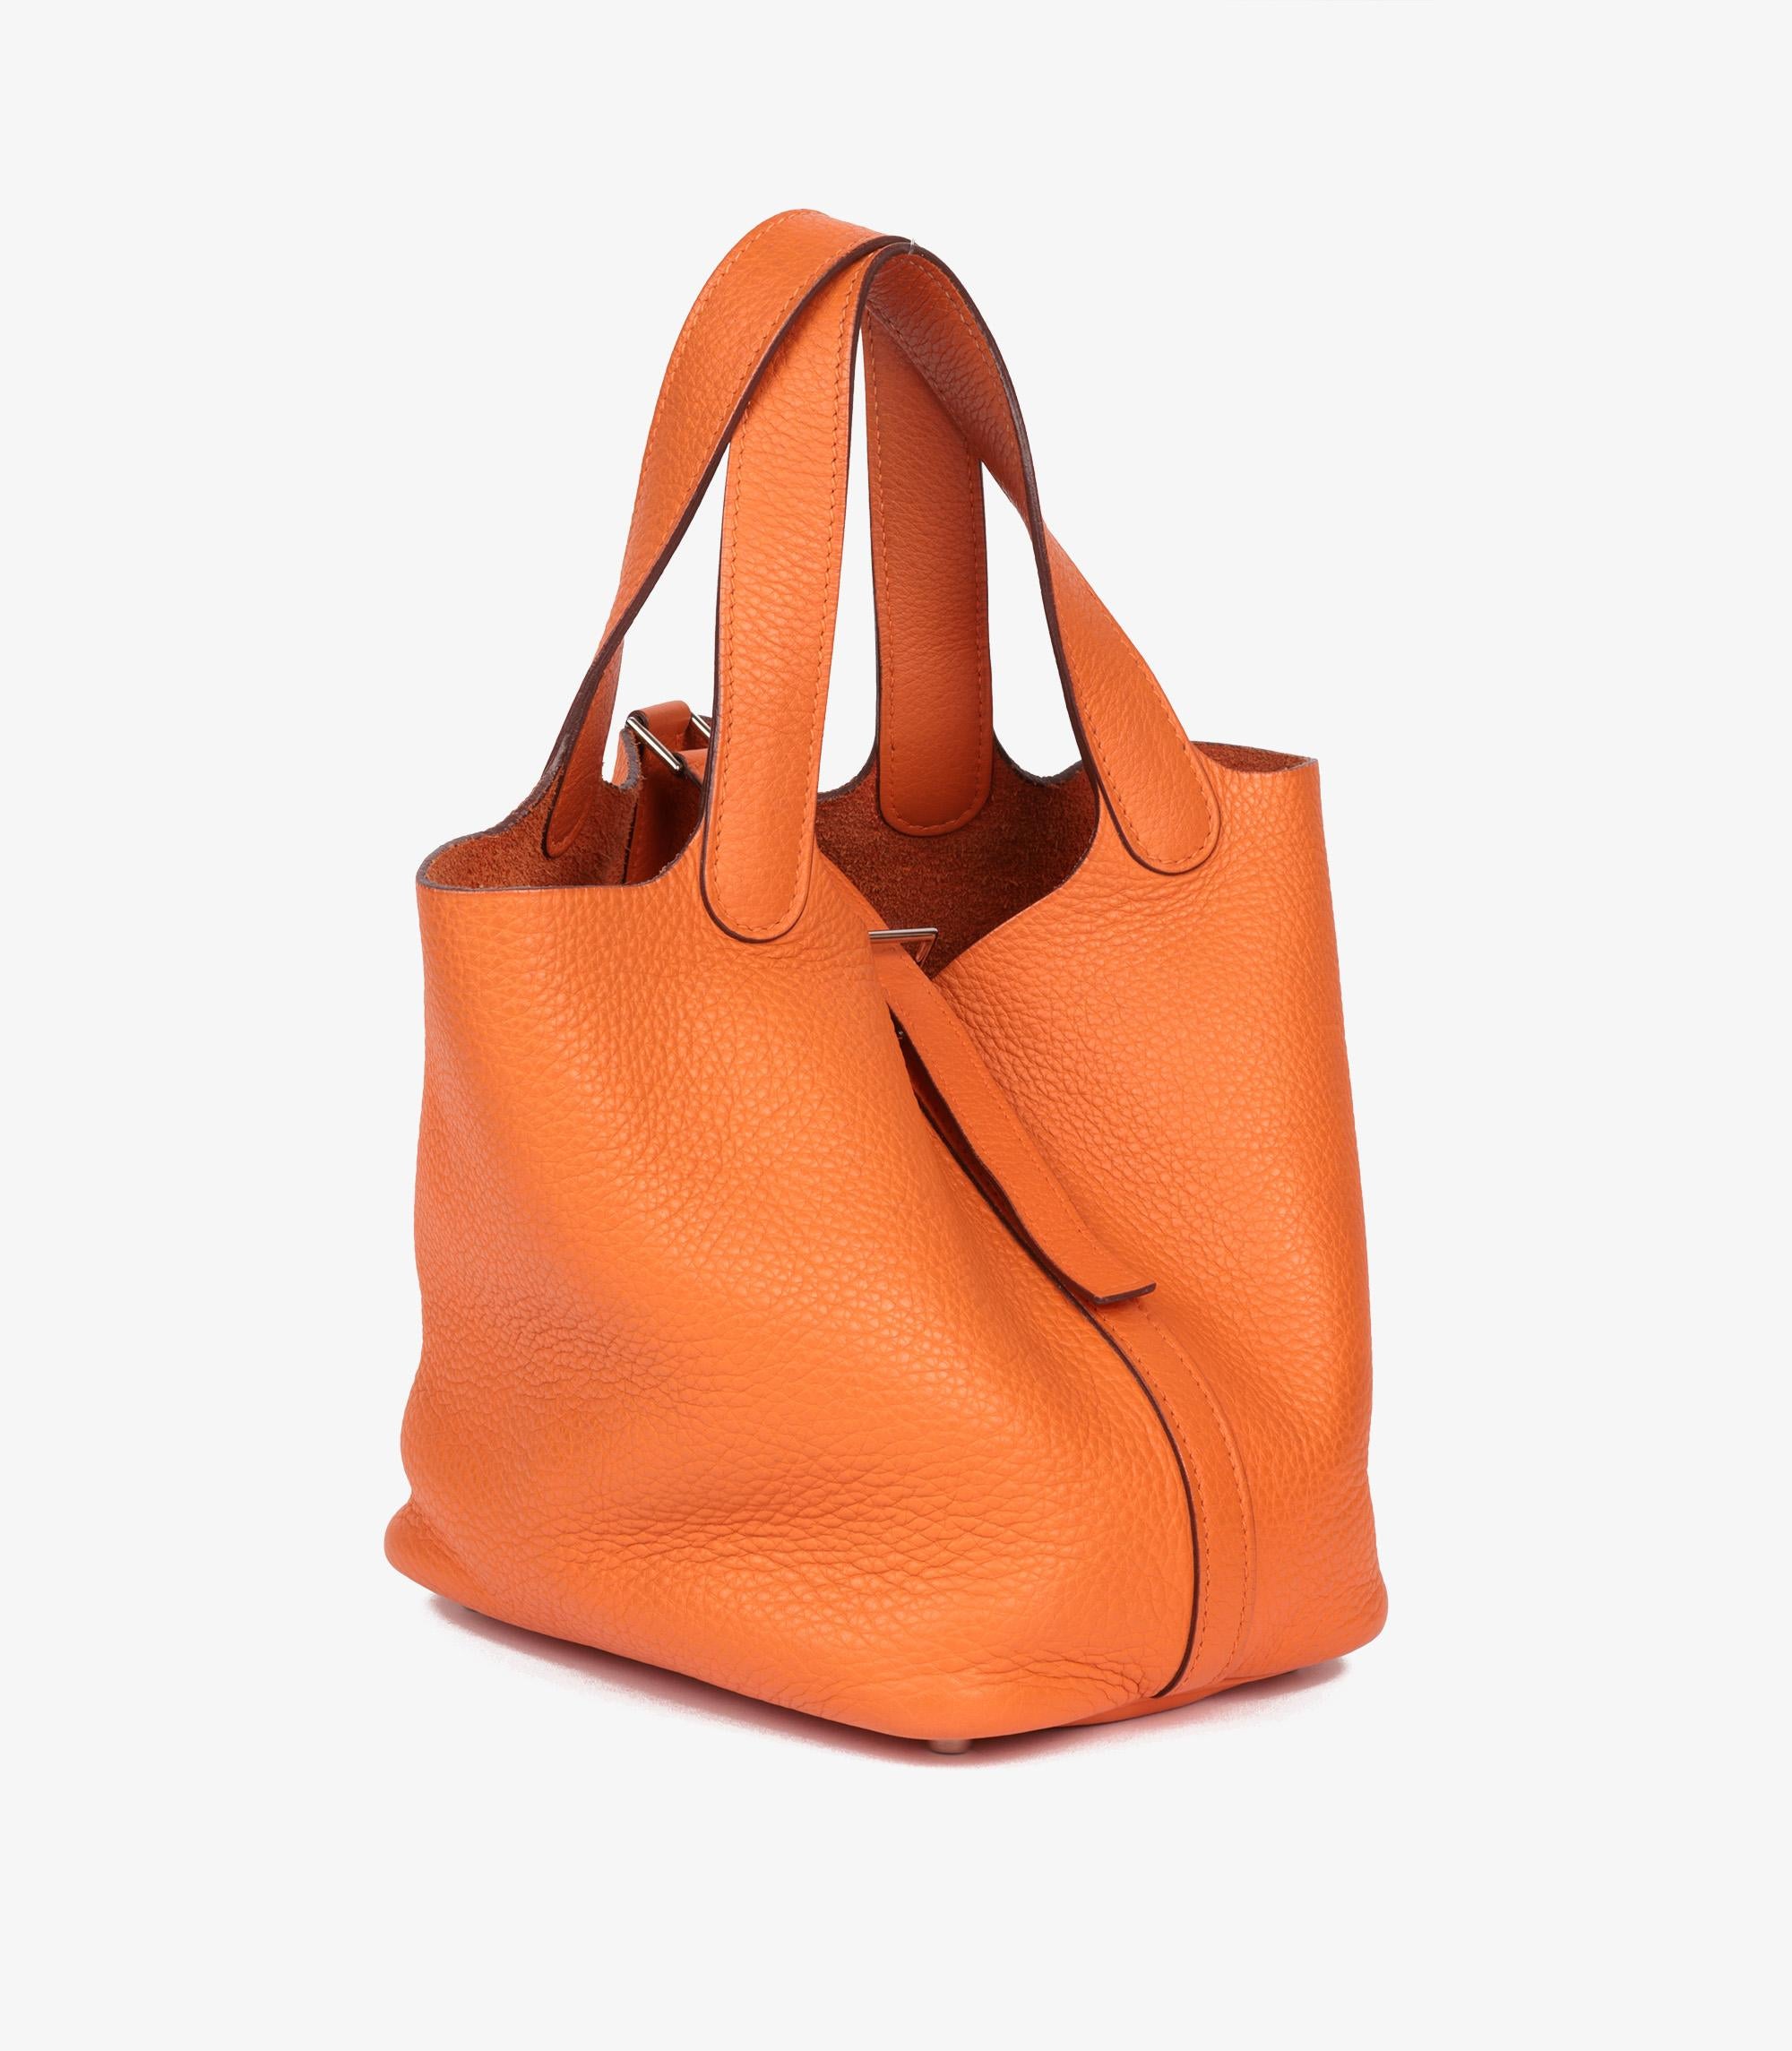 Hermès Orange Clemence Leather Picotin 18

Brand- Hermès
Model- Picotin 18
Product Type- Tote
Serial Number- [I*
Age- Circa 2005
Accompanied By- Hermès Dust Bag, Box, Care Booklet, Entrupy Certificate
Colour- Orange
Hardware- Silver
Material(s)-